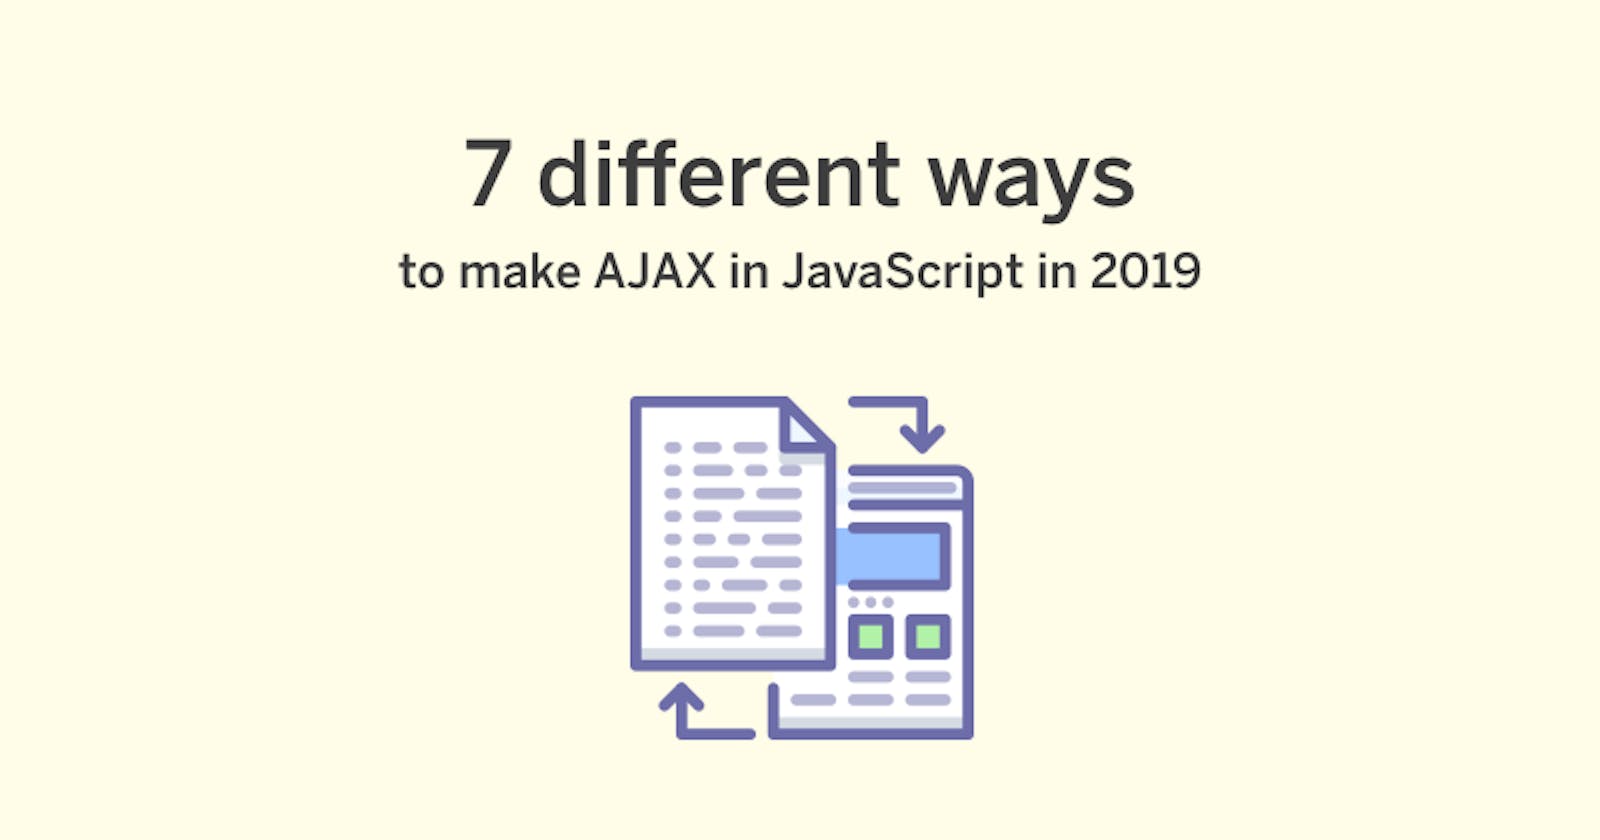 7 different ways to make AJAX calls in JavaScript in 2019